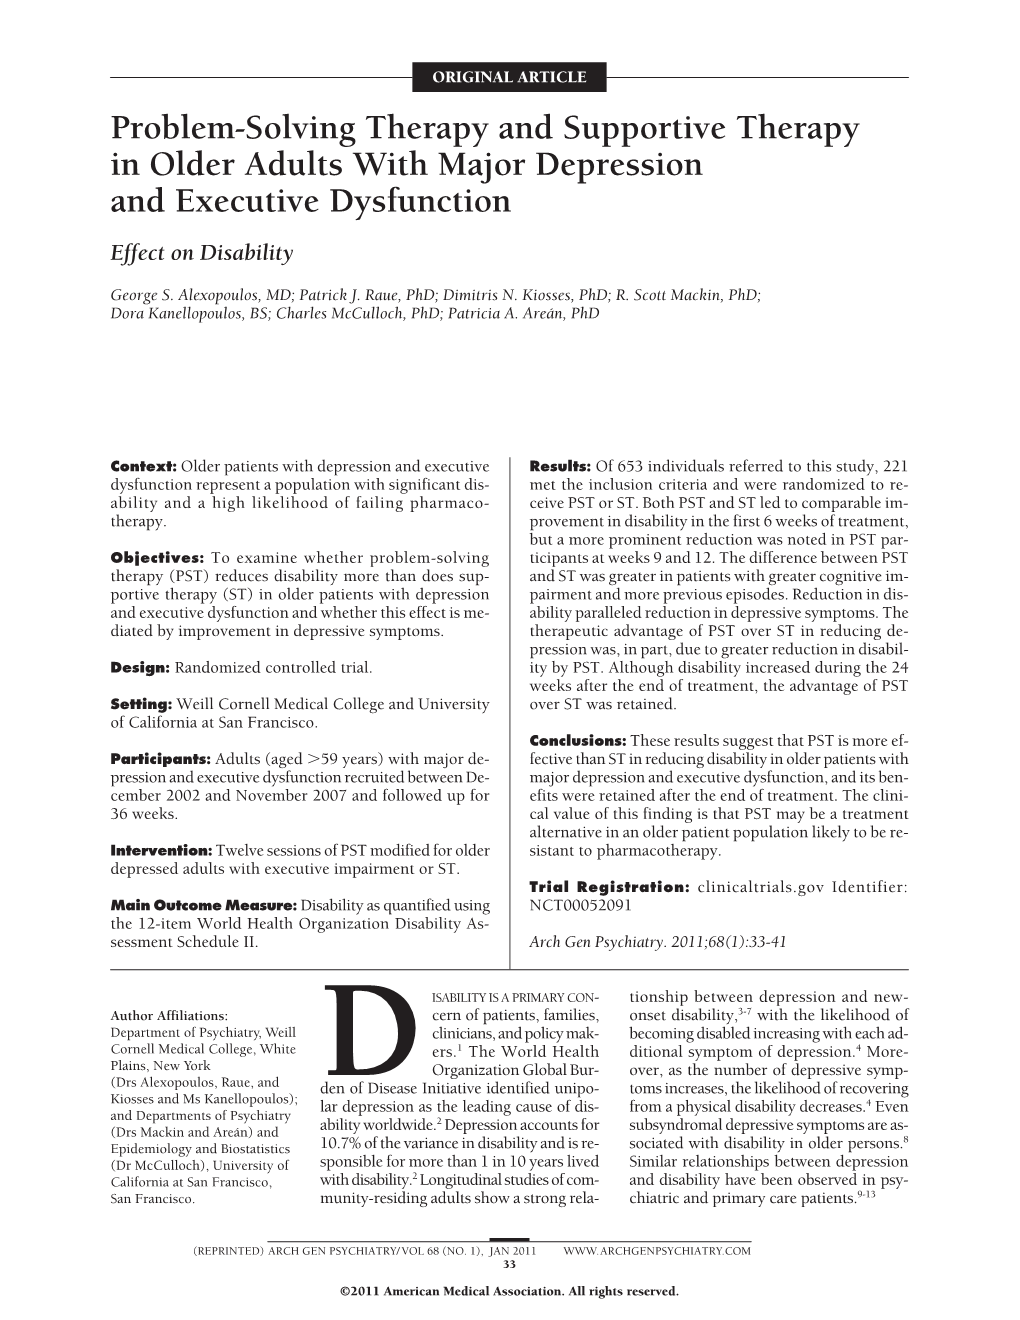 Problem-Solving Therapy and Supportive Therapy in Older Adults with Major Depression and Executive Dysfunction Effect on Disability